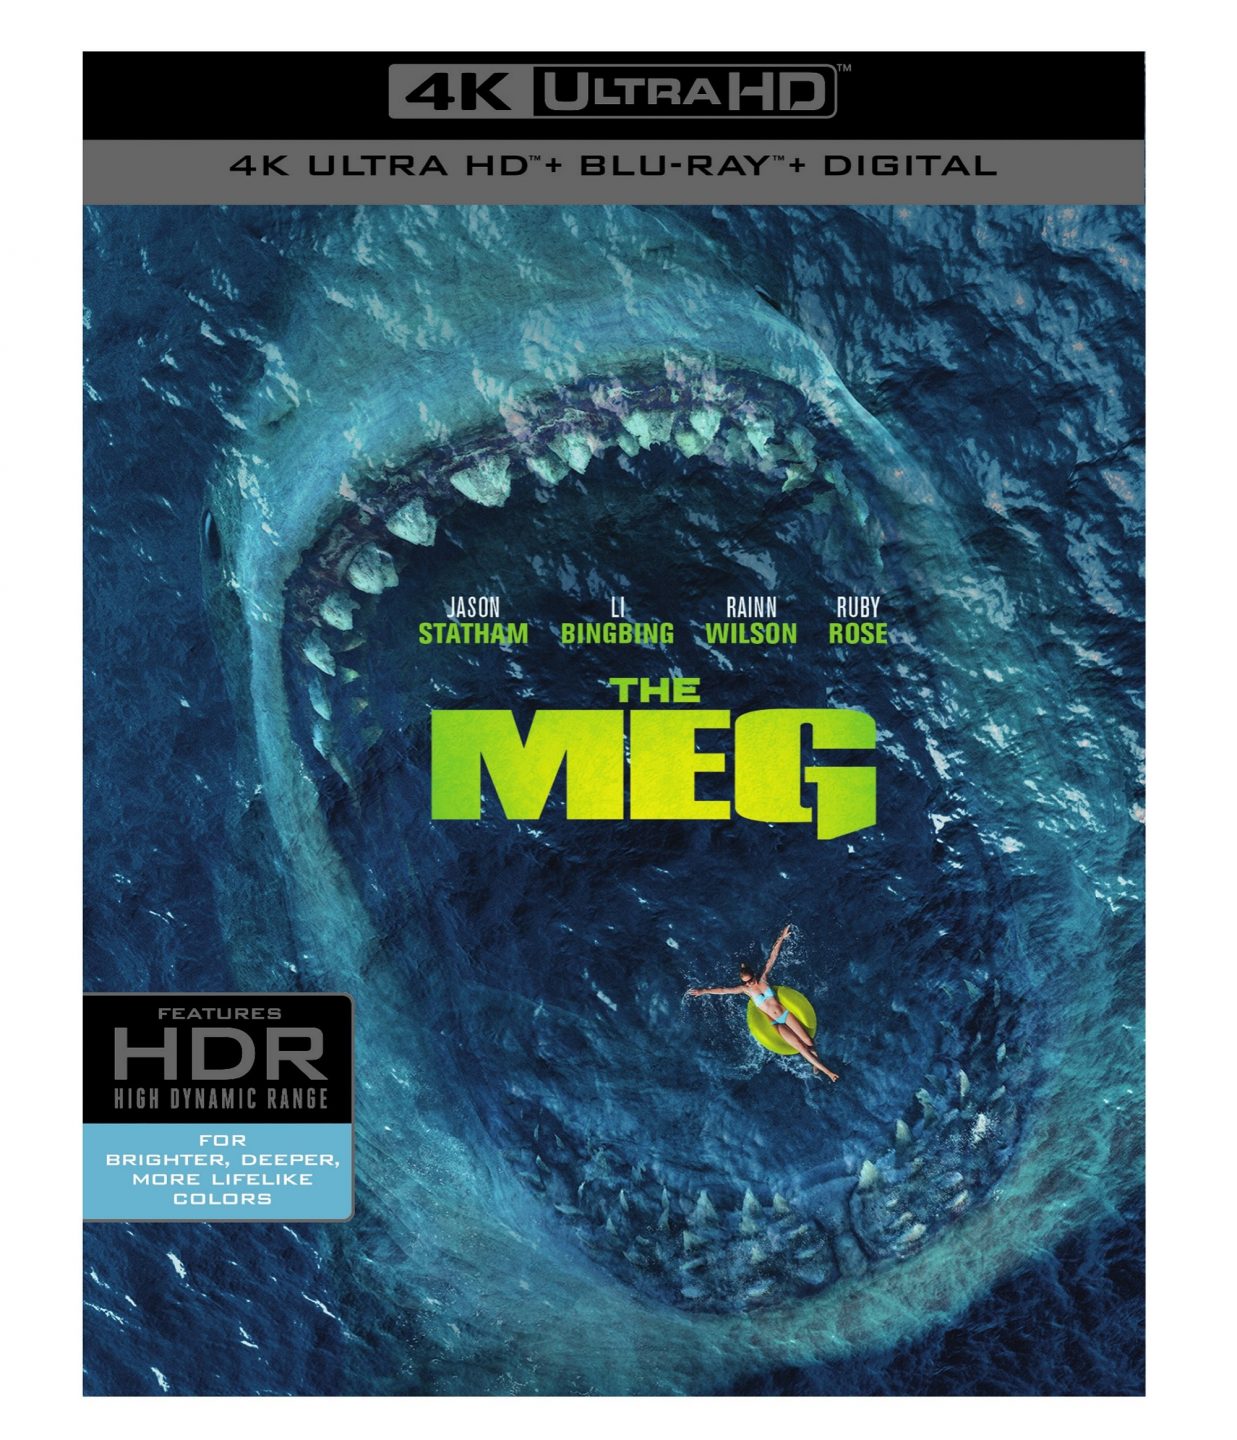 The Meg 4K Ultra HD Combo Pack cover (Warner Bros. Home Entertainment)